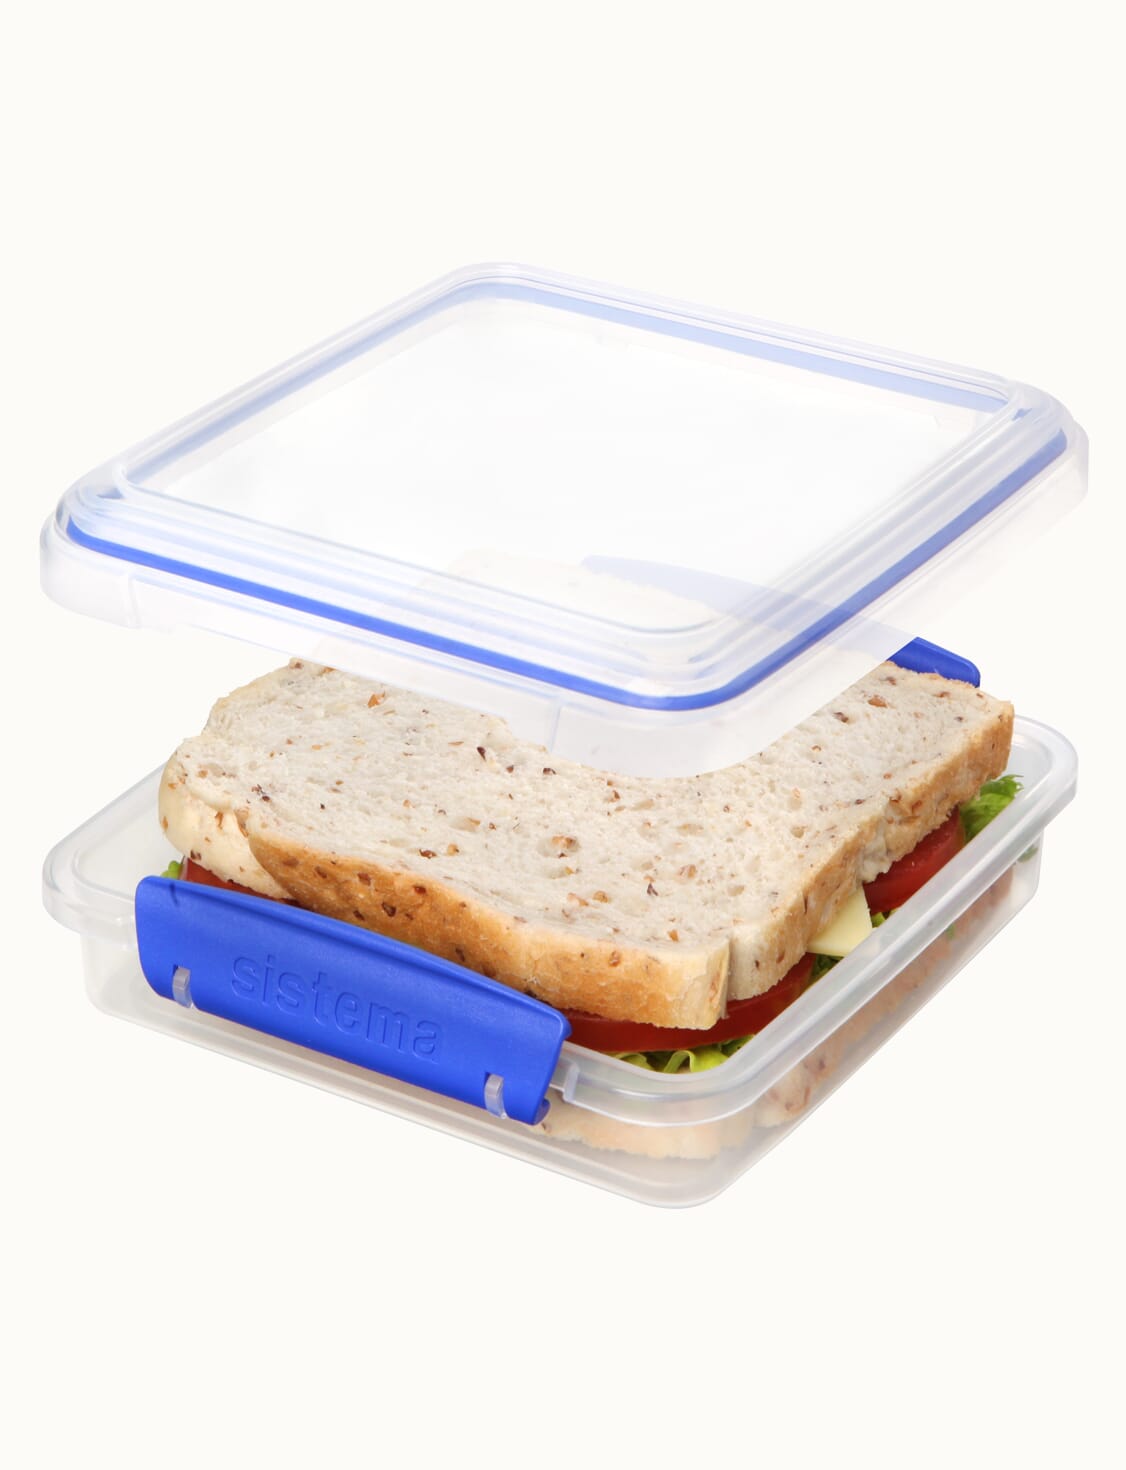 https://stergita.sirv.com/sistema/catalog/product/1/6/1643_450ml_sandwich_box_food_sandwich_angle_exploded_1.png?canvas.color=fcfbf8